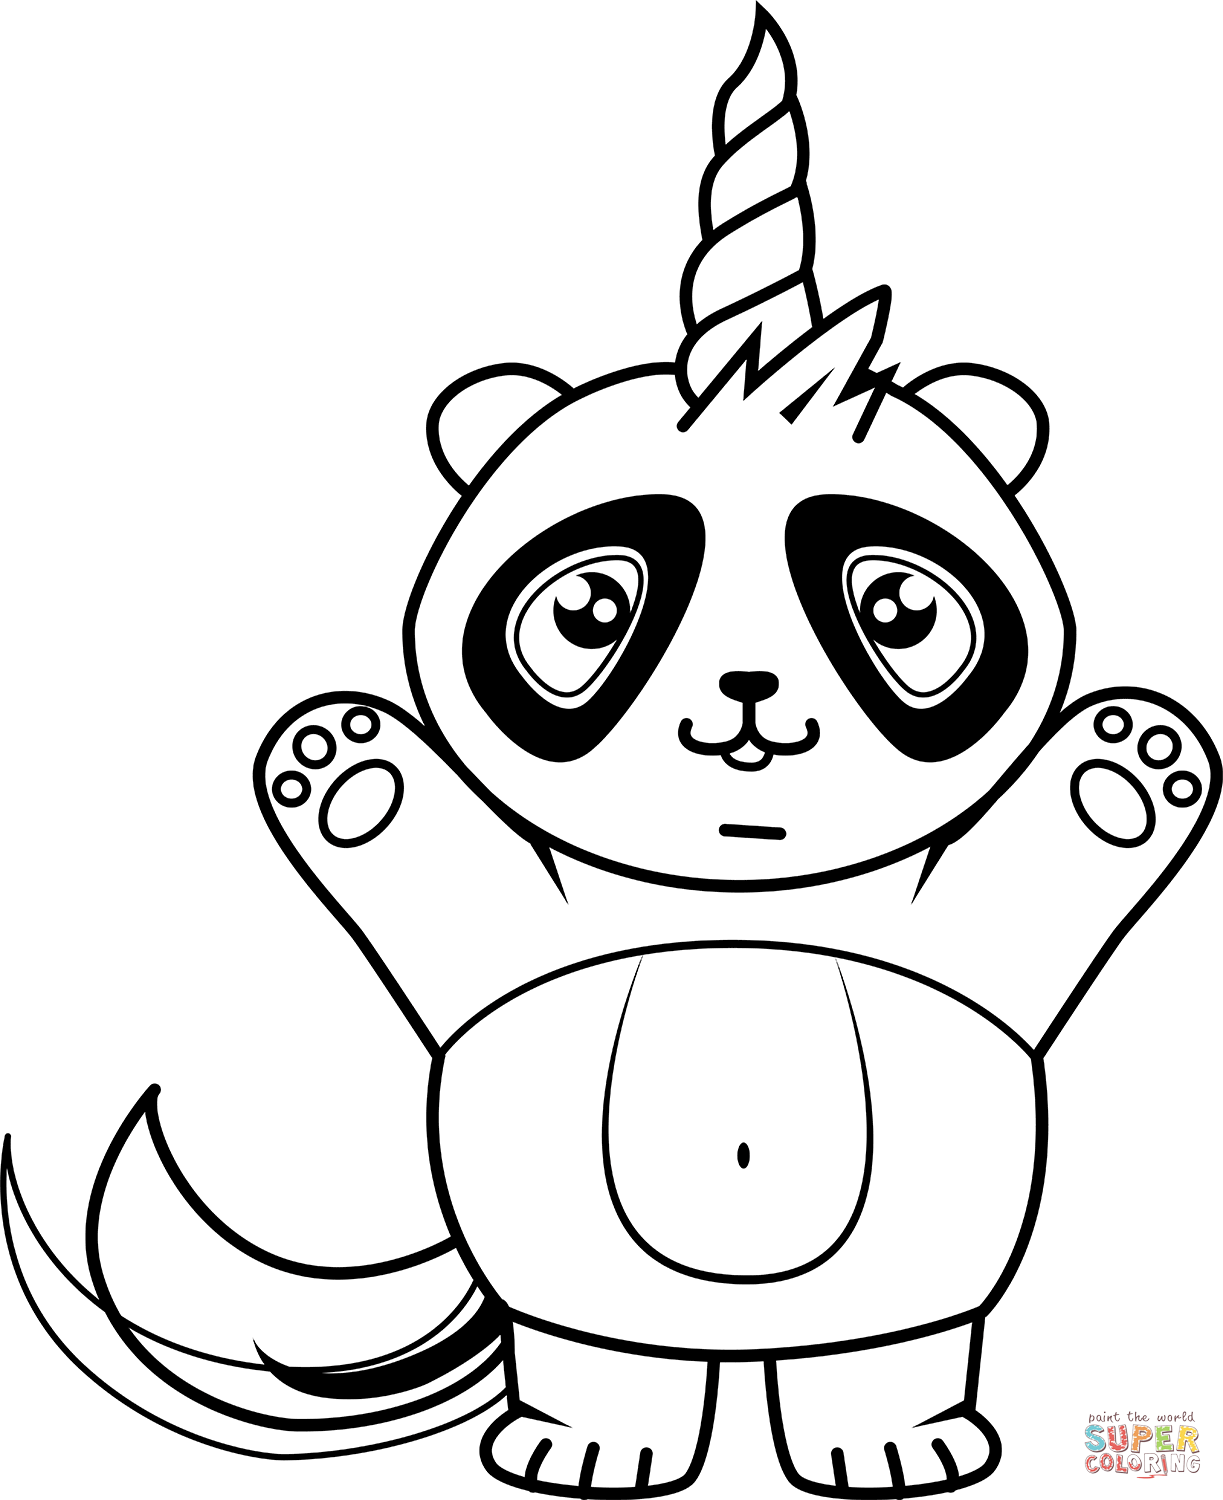 Unicorn panda coloring page free printable coloring pages